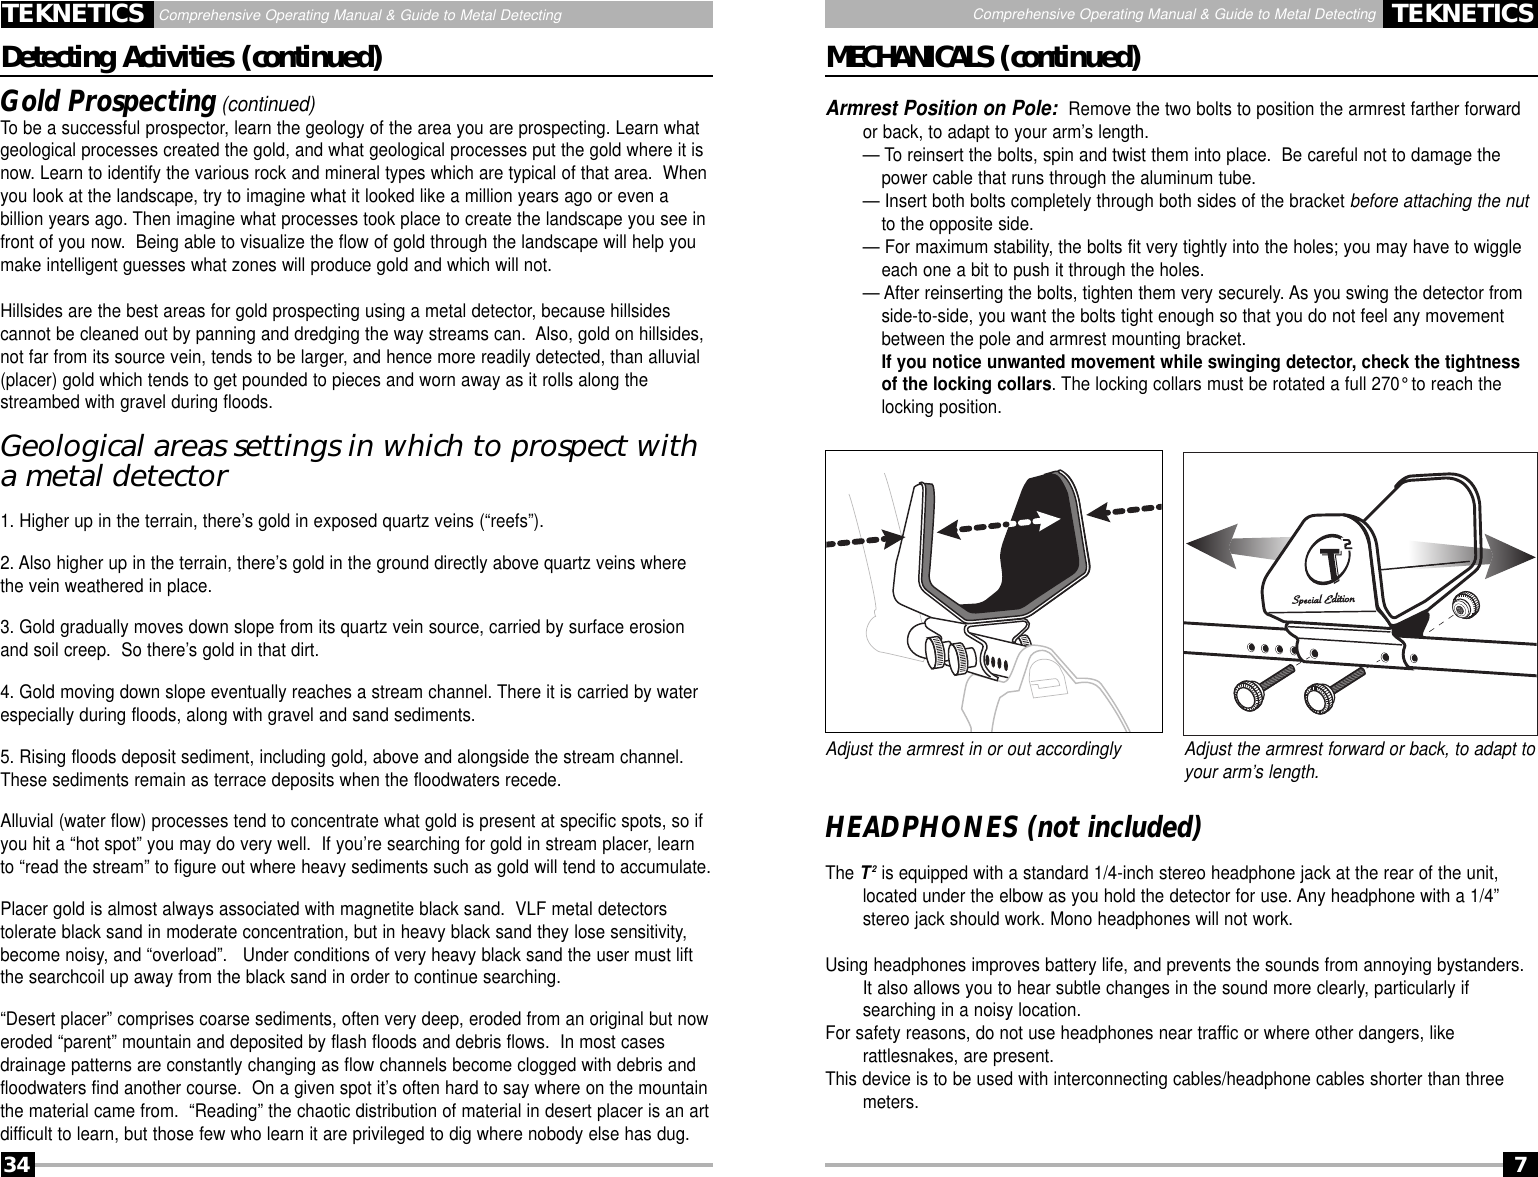 Page 7 of First Texas T2MD Professional Metal Detector User Manual Layout 1